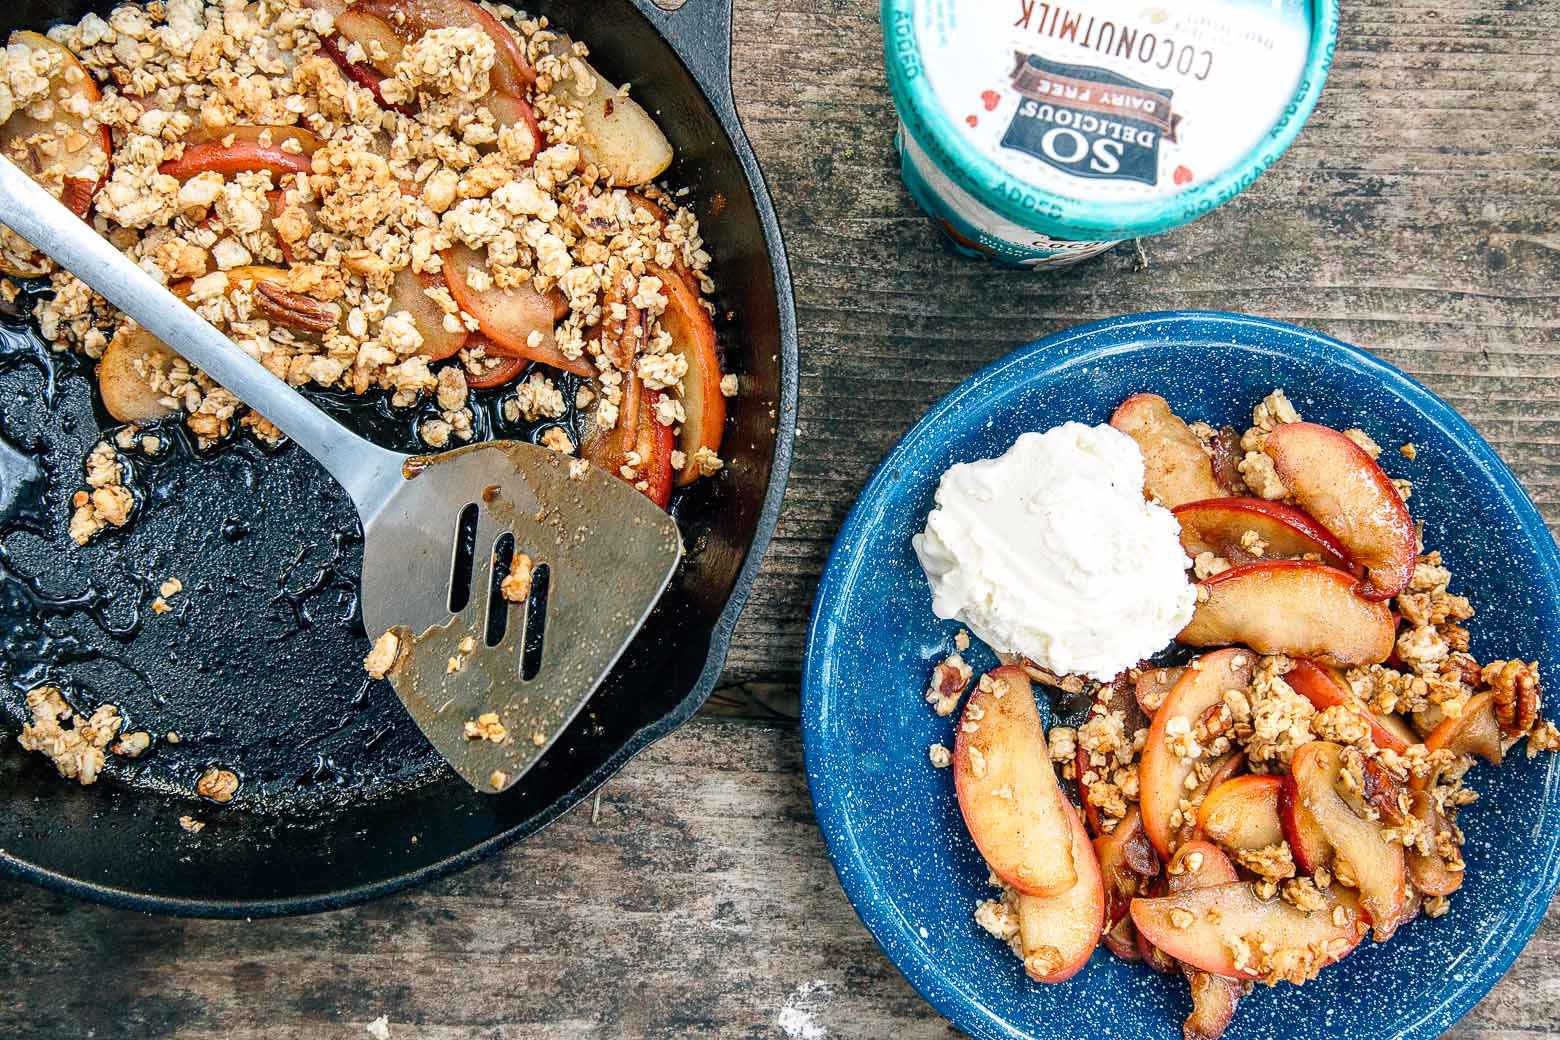 Easy and no-fuss one-pot camping recipes